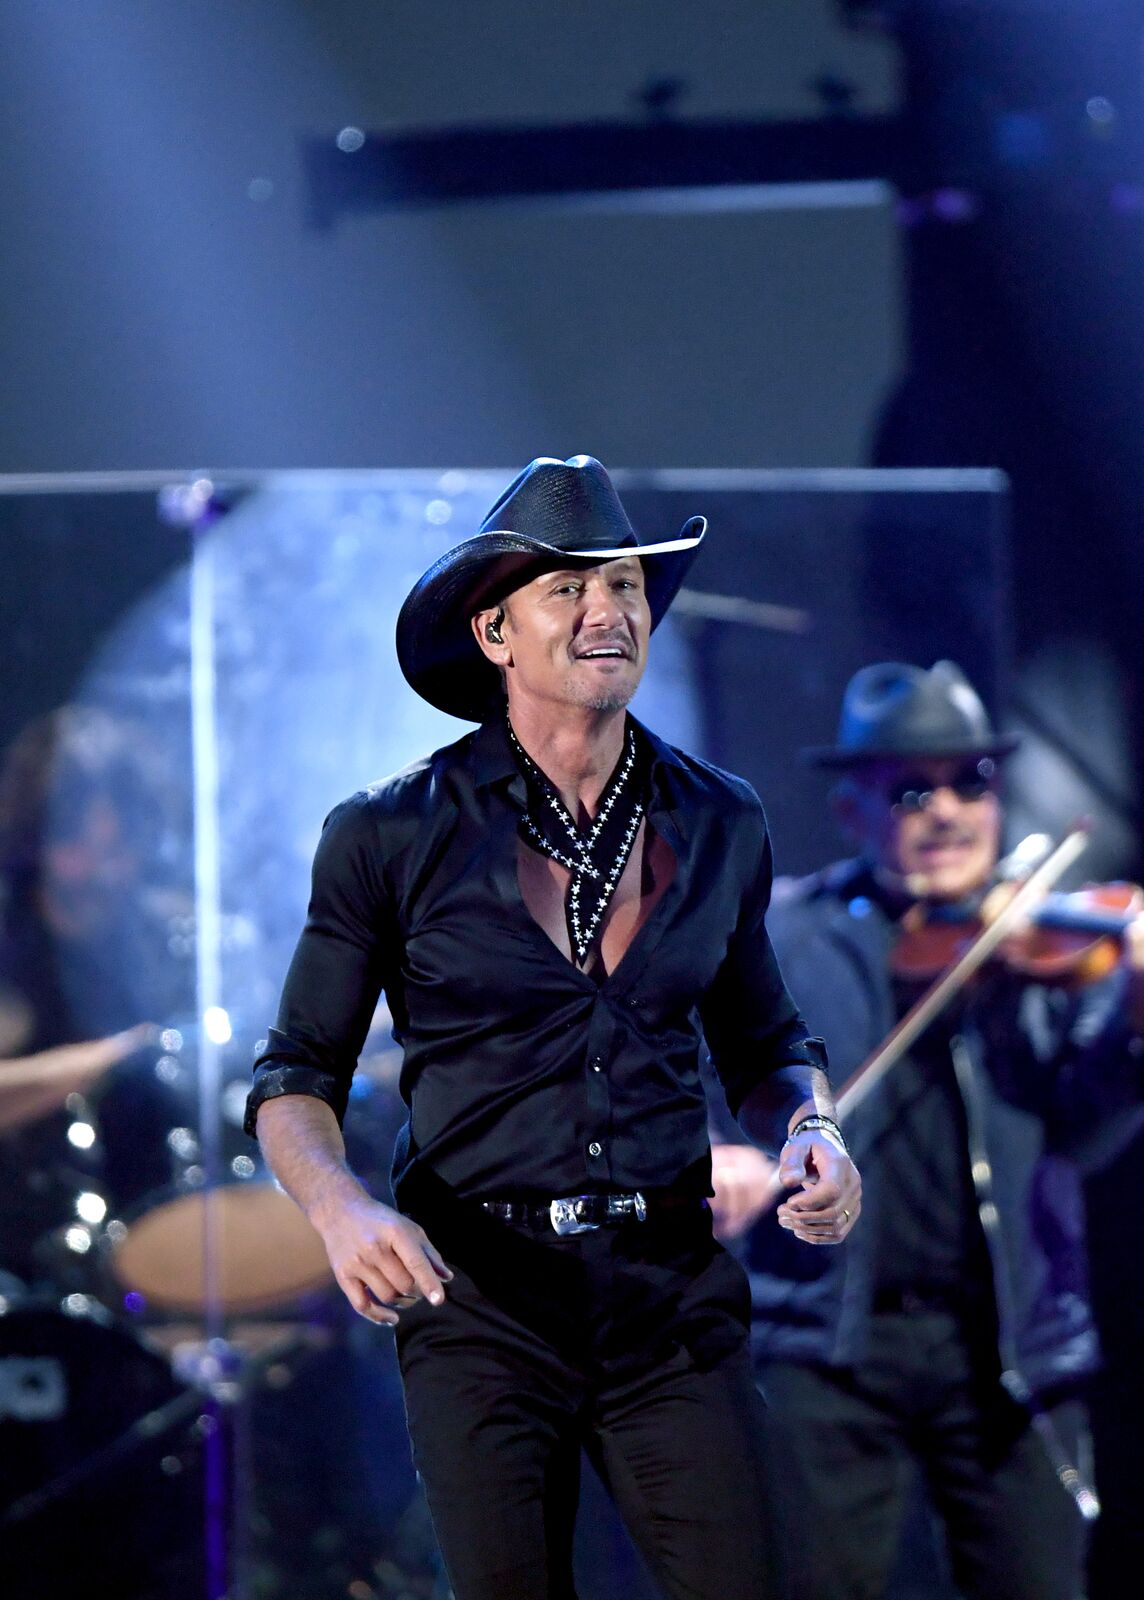 Tim McGraw onstage during the iHeartRadio Music Festival at T-Mobile Arena on September 20, 2019, in Las Vegas, Nevada | Photo: Ethan Miller/Getty Images